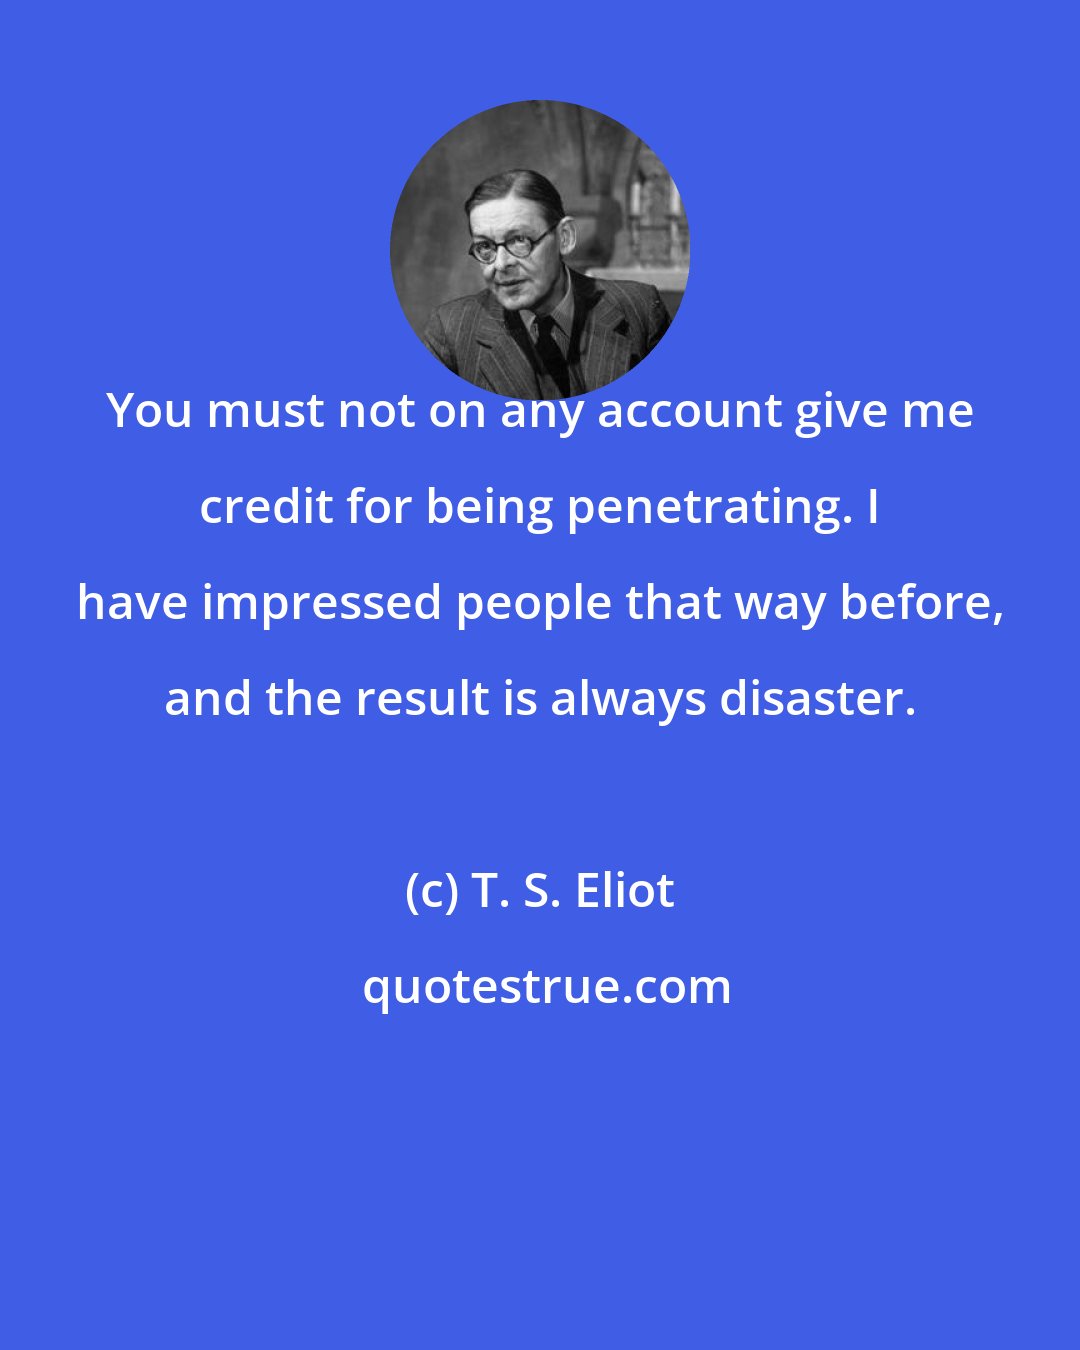 T. S. Eliot: You must not on any account give me credit for being penetrating. I have impressed people that way before, and the result is always disaster.